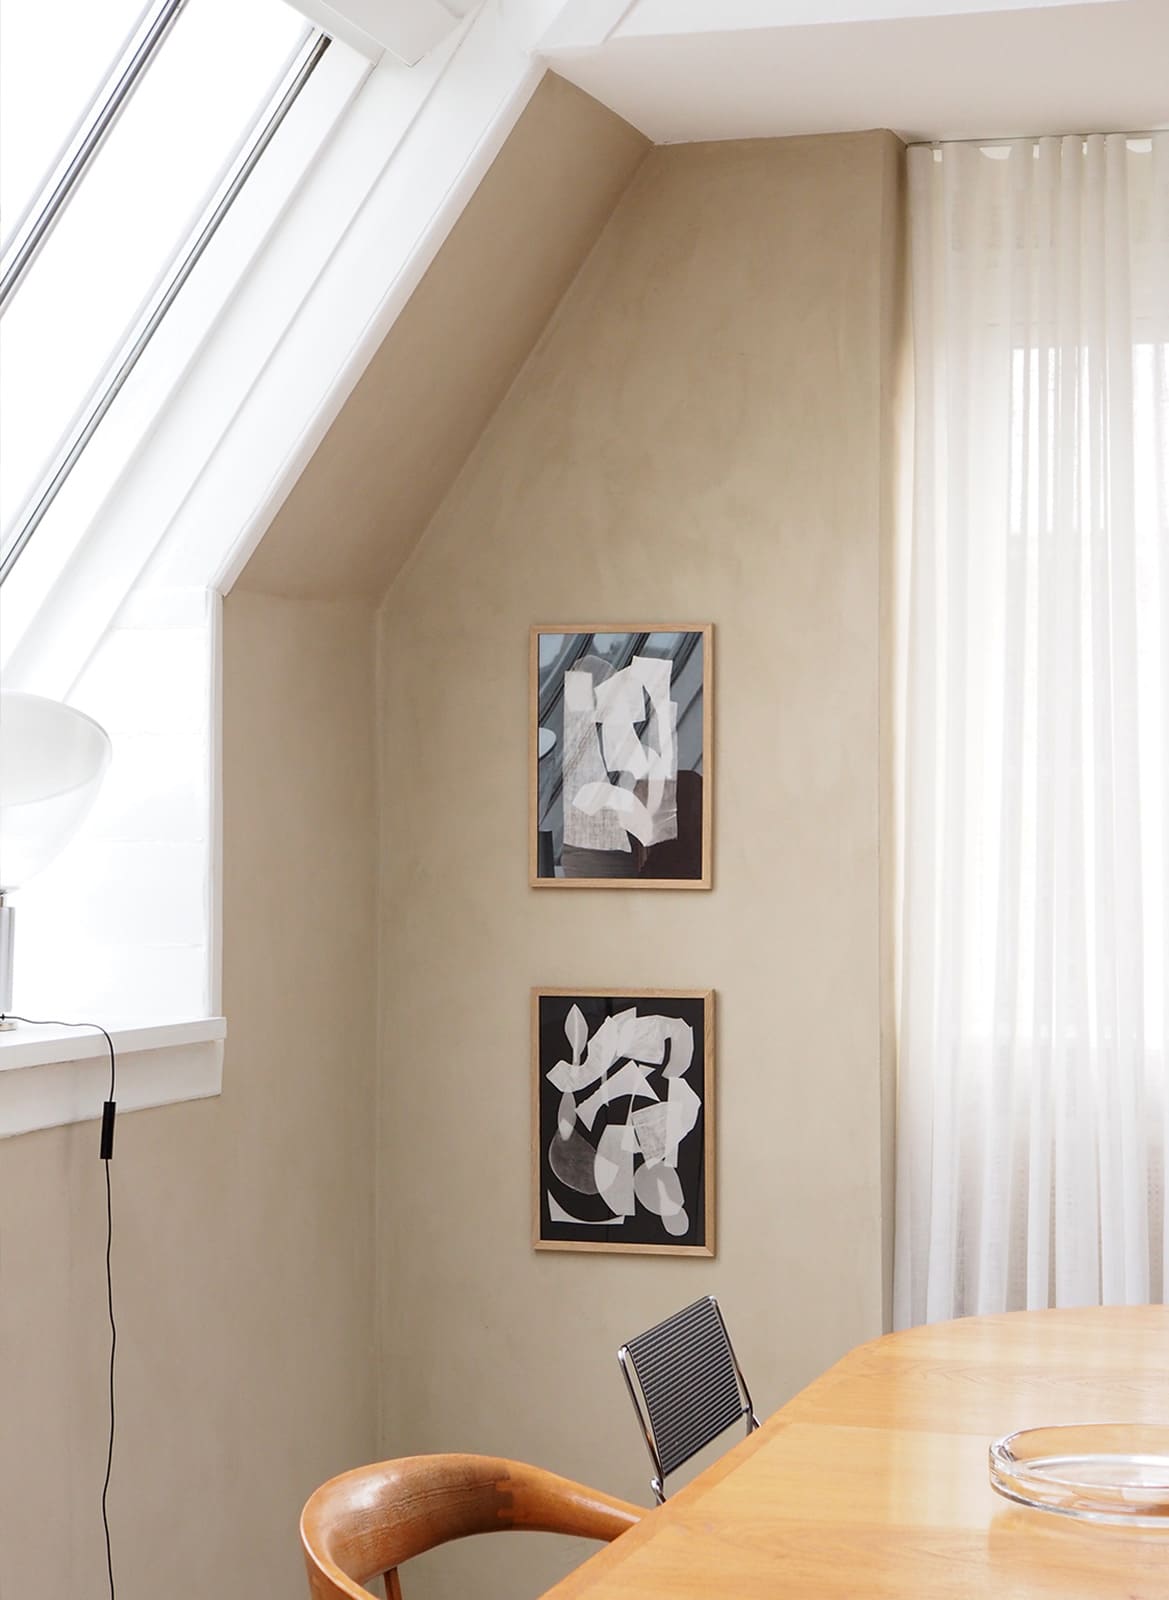 Framed black and white posters hanging above dining table by Atelier Cph